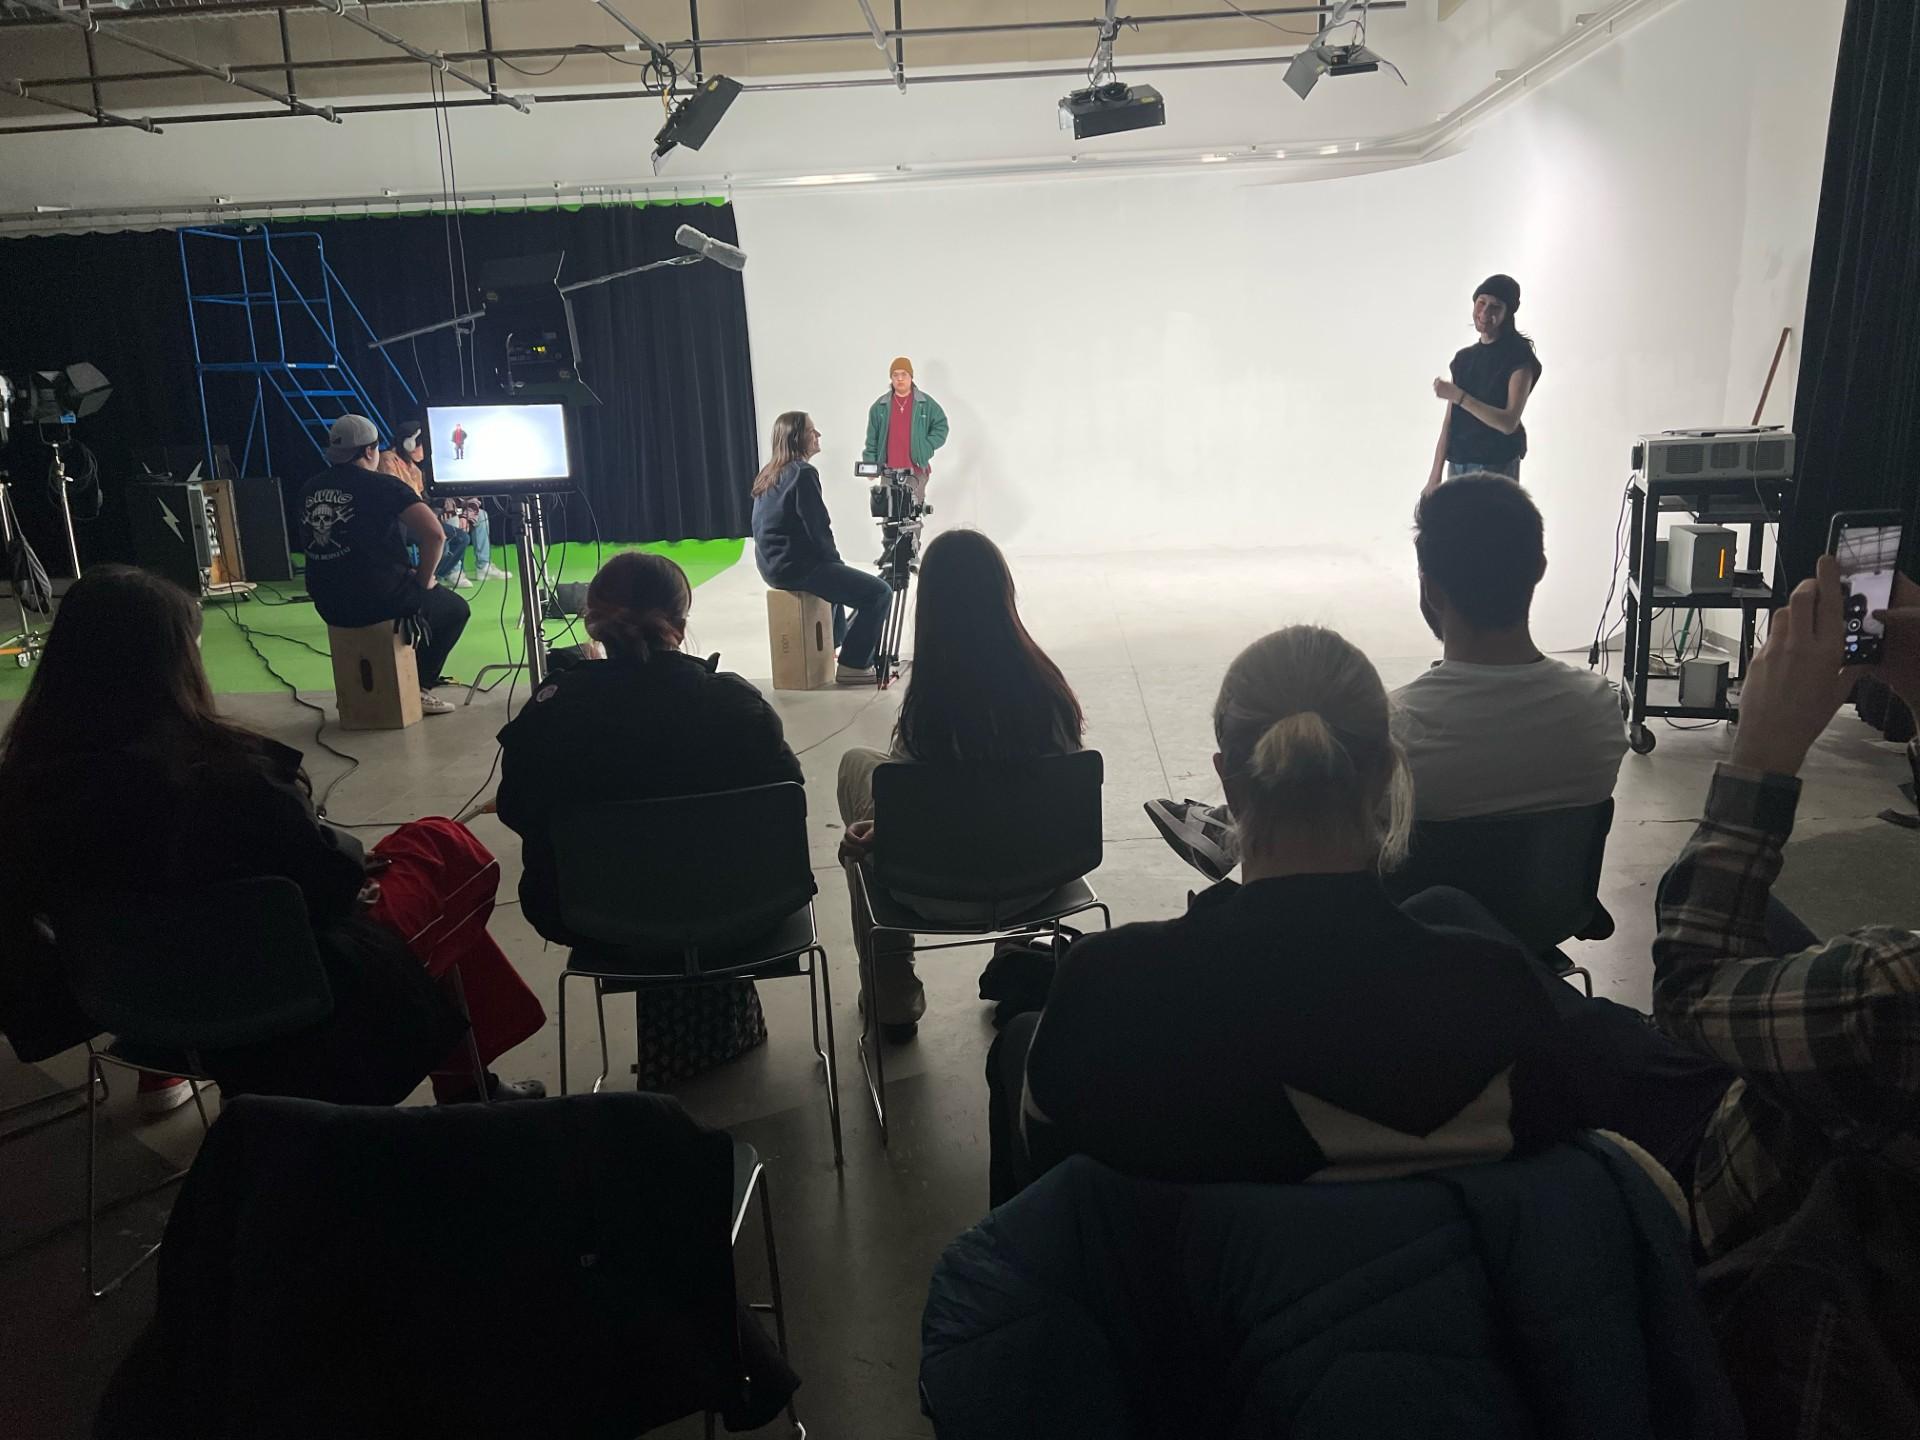 People sit in a studio and watch as others are filmed standing in front of a white screen.